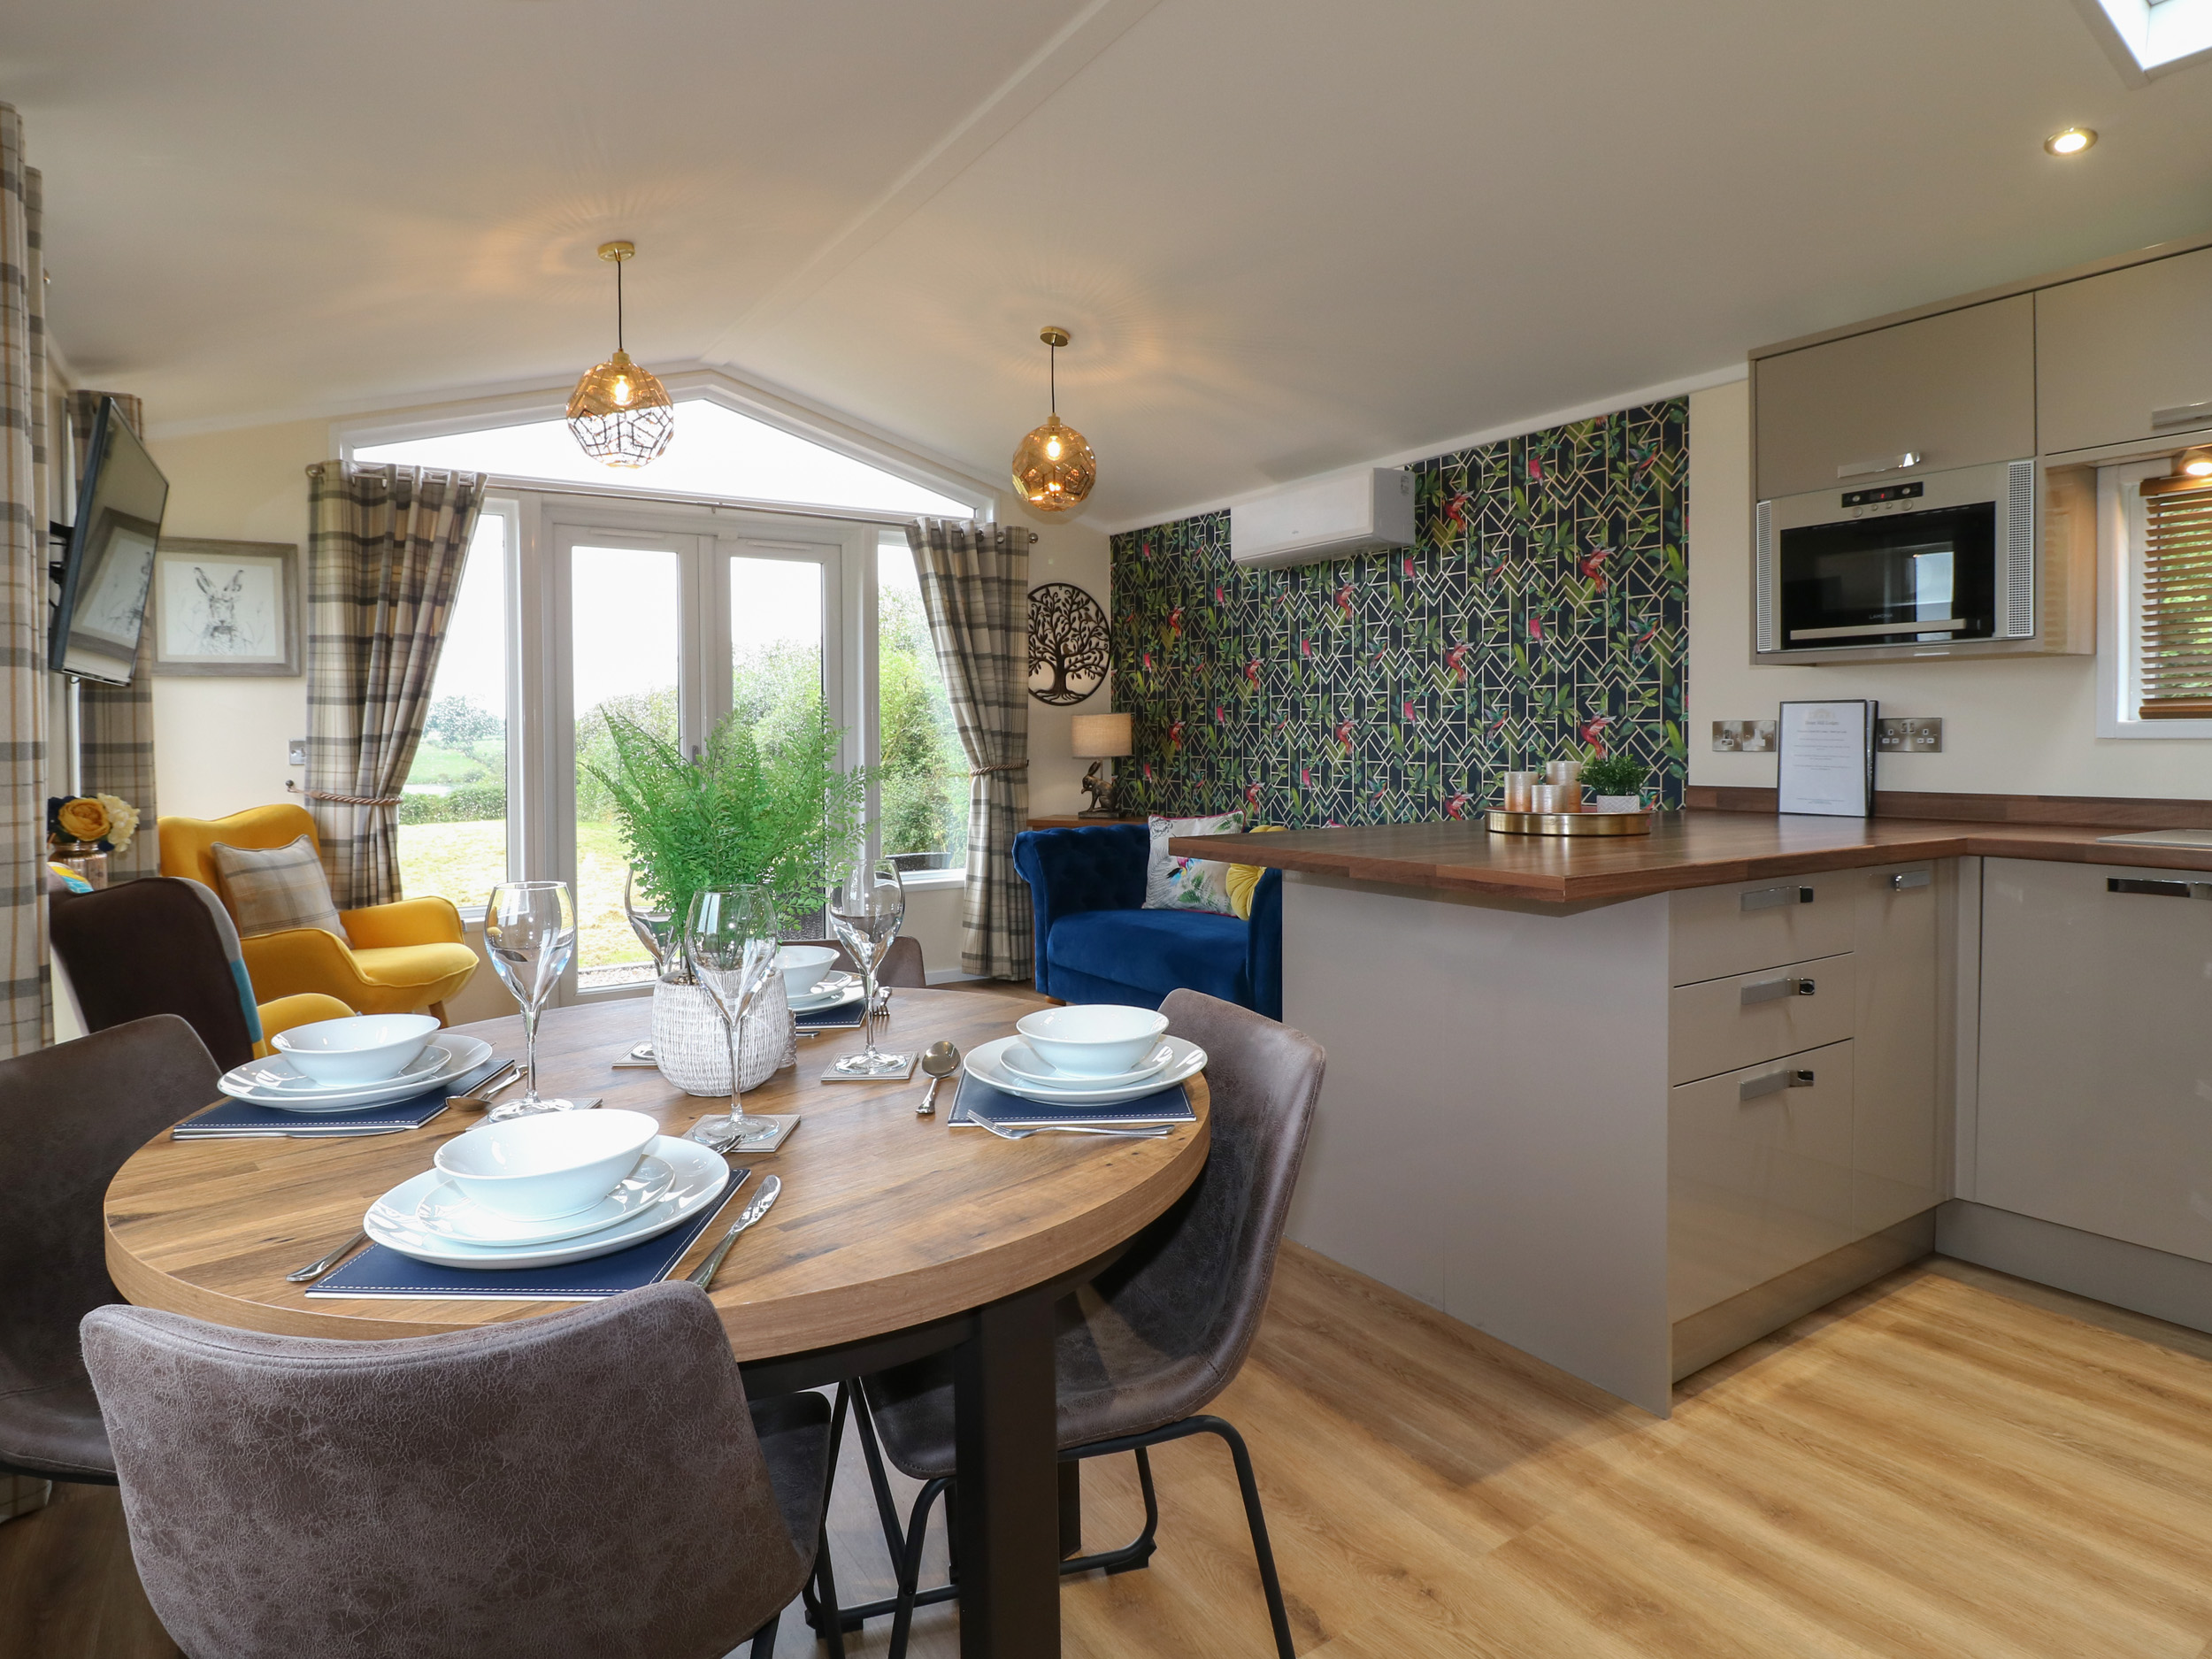 Buttercup, Donisthorpe, Leicestershire. Open-plan living. Lake views. Serene location. Two bedrooms.